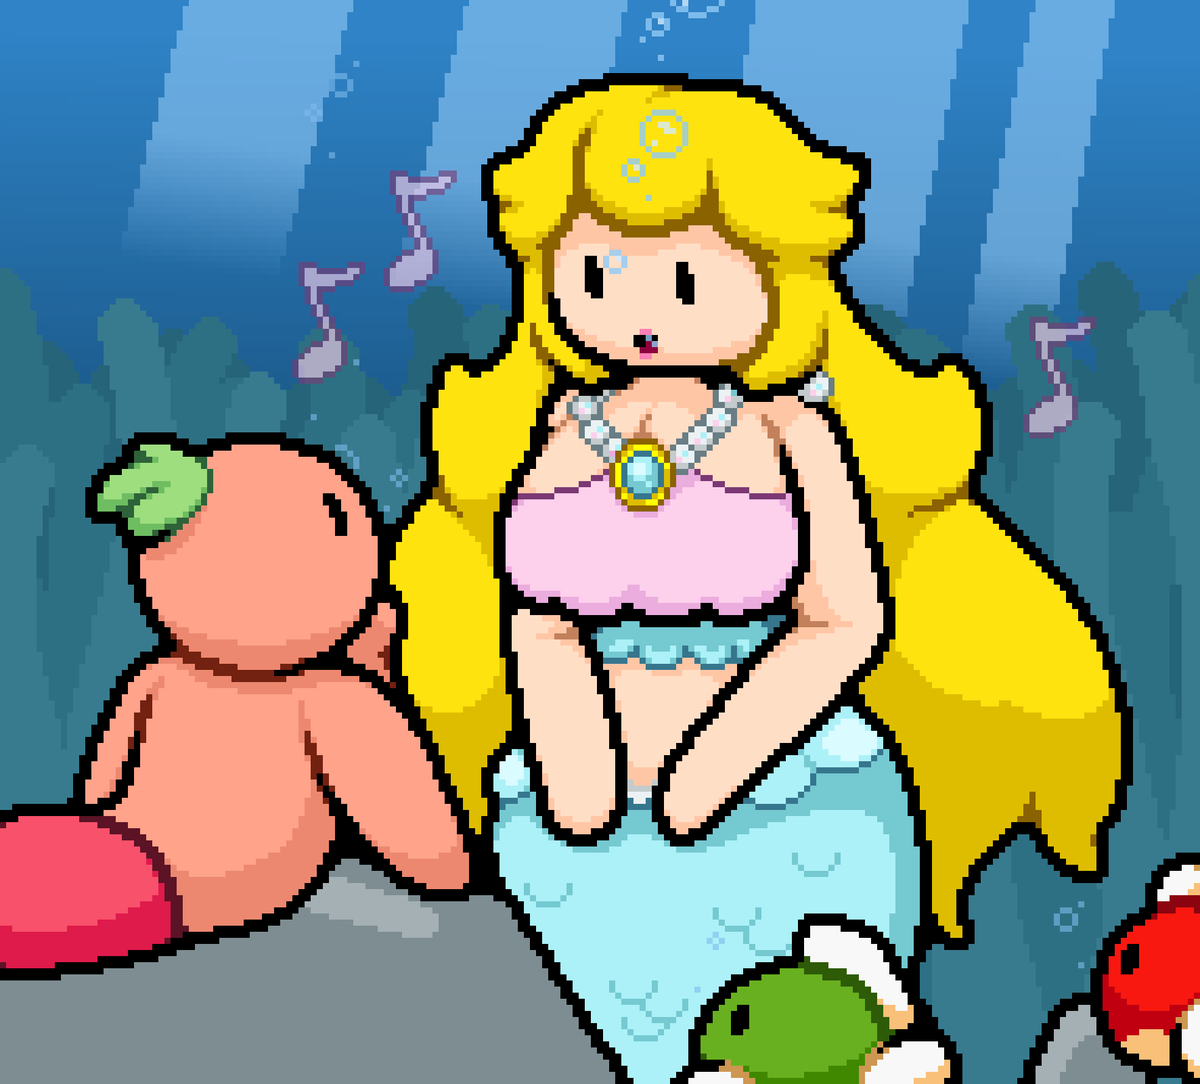 Was asked to draw Peach this mermay

Simple lil' thing of Tomato and some fish listening to her sing 'v'

(Thinking about it, it's probably hard to sing underwater but I didn't really think about that at the time, whoops)
#PrincessPeachShowtime  #PrincessPeach